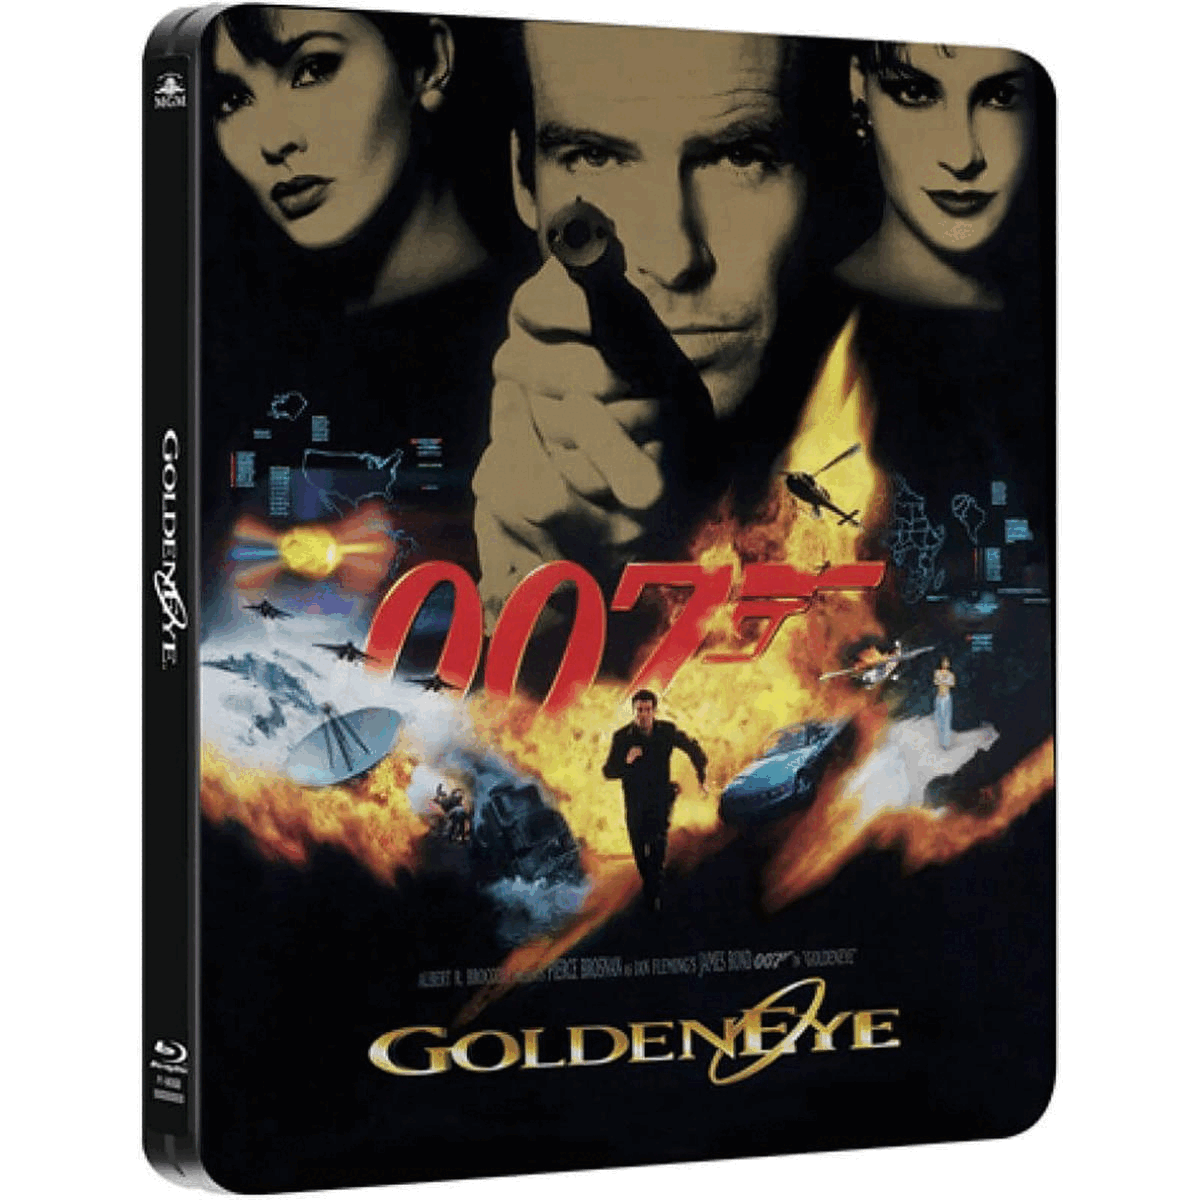 Gif showing multiple images of the steelbook in a continuous loop